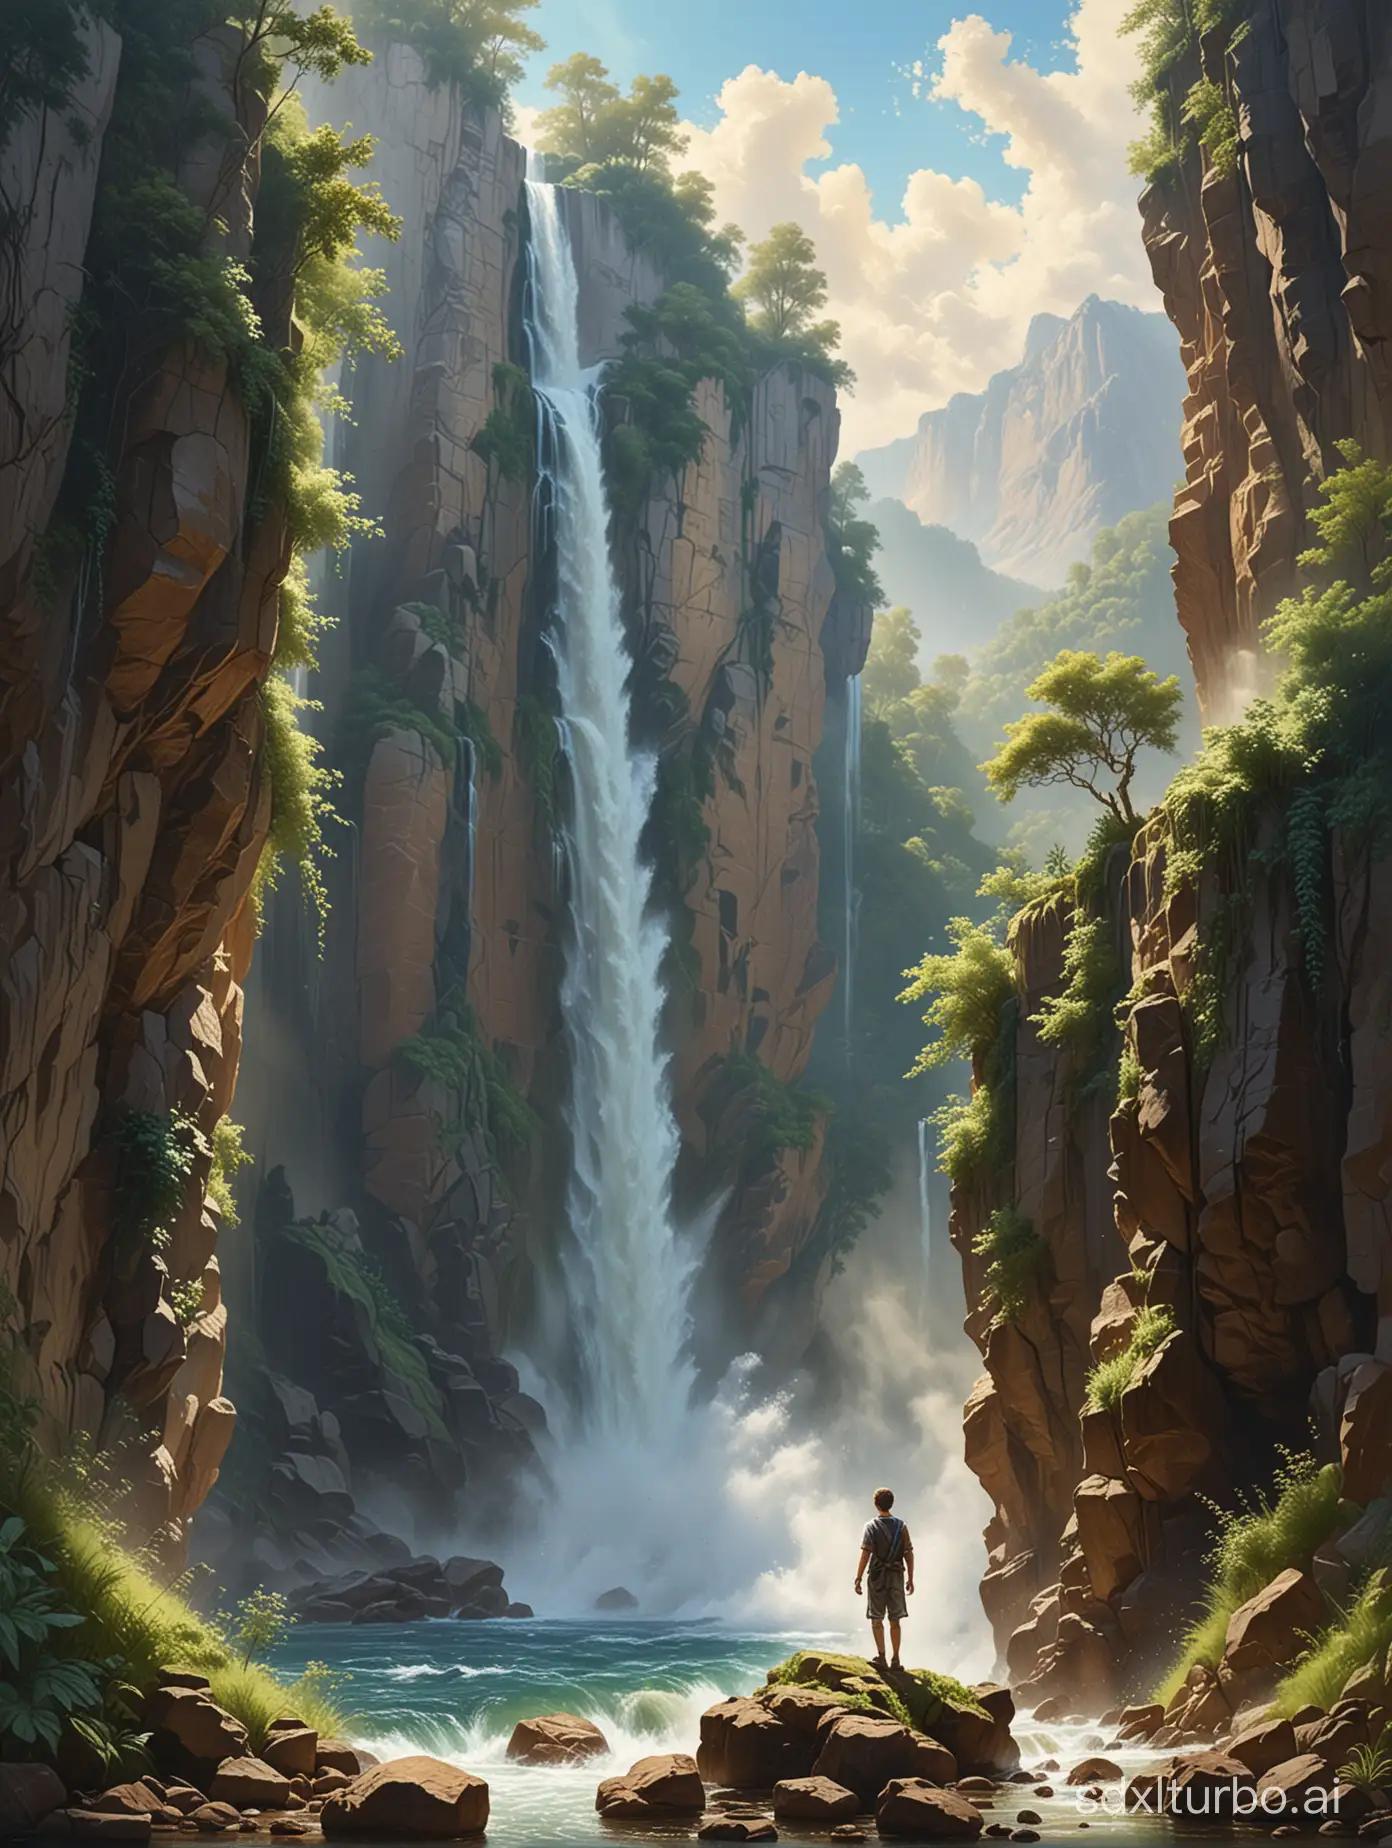 Ultrarealistic painting in the style of Carl Spitzweg.A breathtaking scene of a young boy standing on the edge of a majestic cliff, surrounded by the beauty of nature. The boy, with his back to the viewer, gazes at the stunning waterfall that cascades down the cliff, creating a refreshing mist. The lush greenery on the rocky terrain adds a sense of harmony with nature, while the bright blue sky above accentuates the serenity of the moment. The clear waterfall blends seamlessly with the sky, creating a mesmerizing visual effect. The overall atmosphere of the image is tranquil and awe-inspiring, evoking a deep appreciation for the natural world and its beauty.